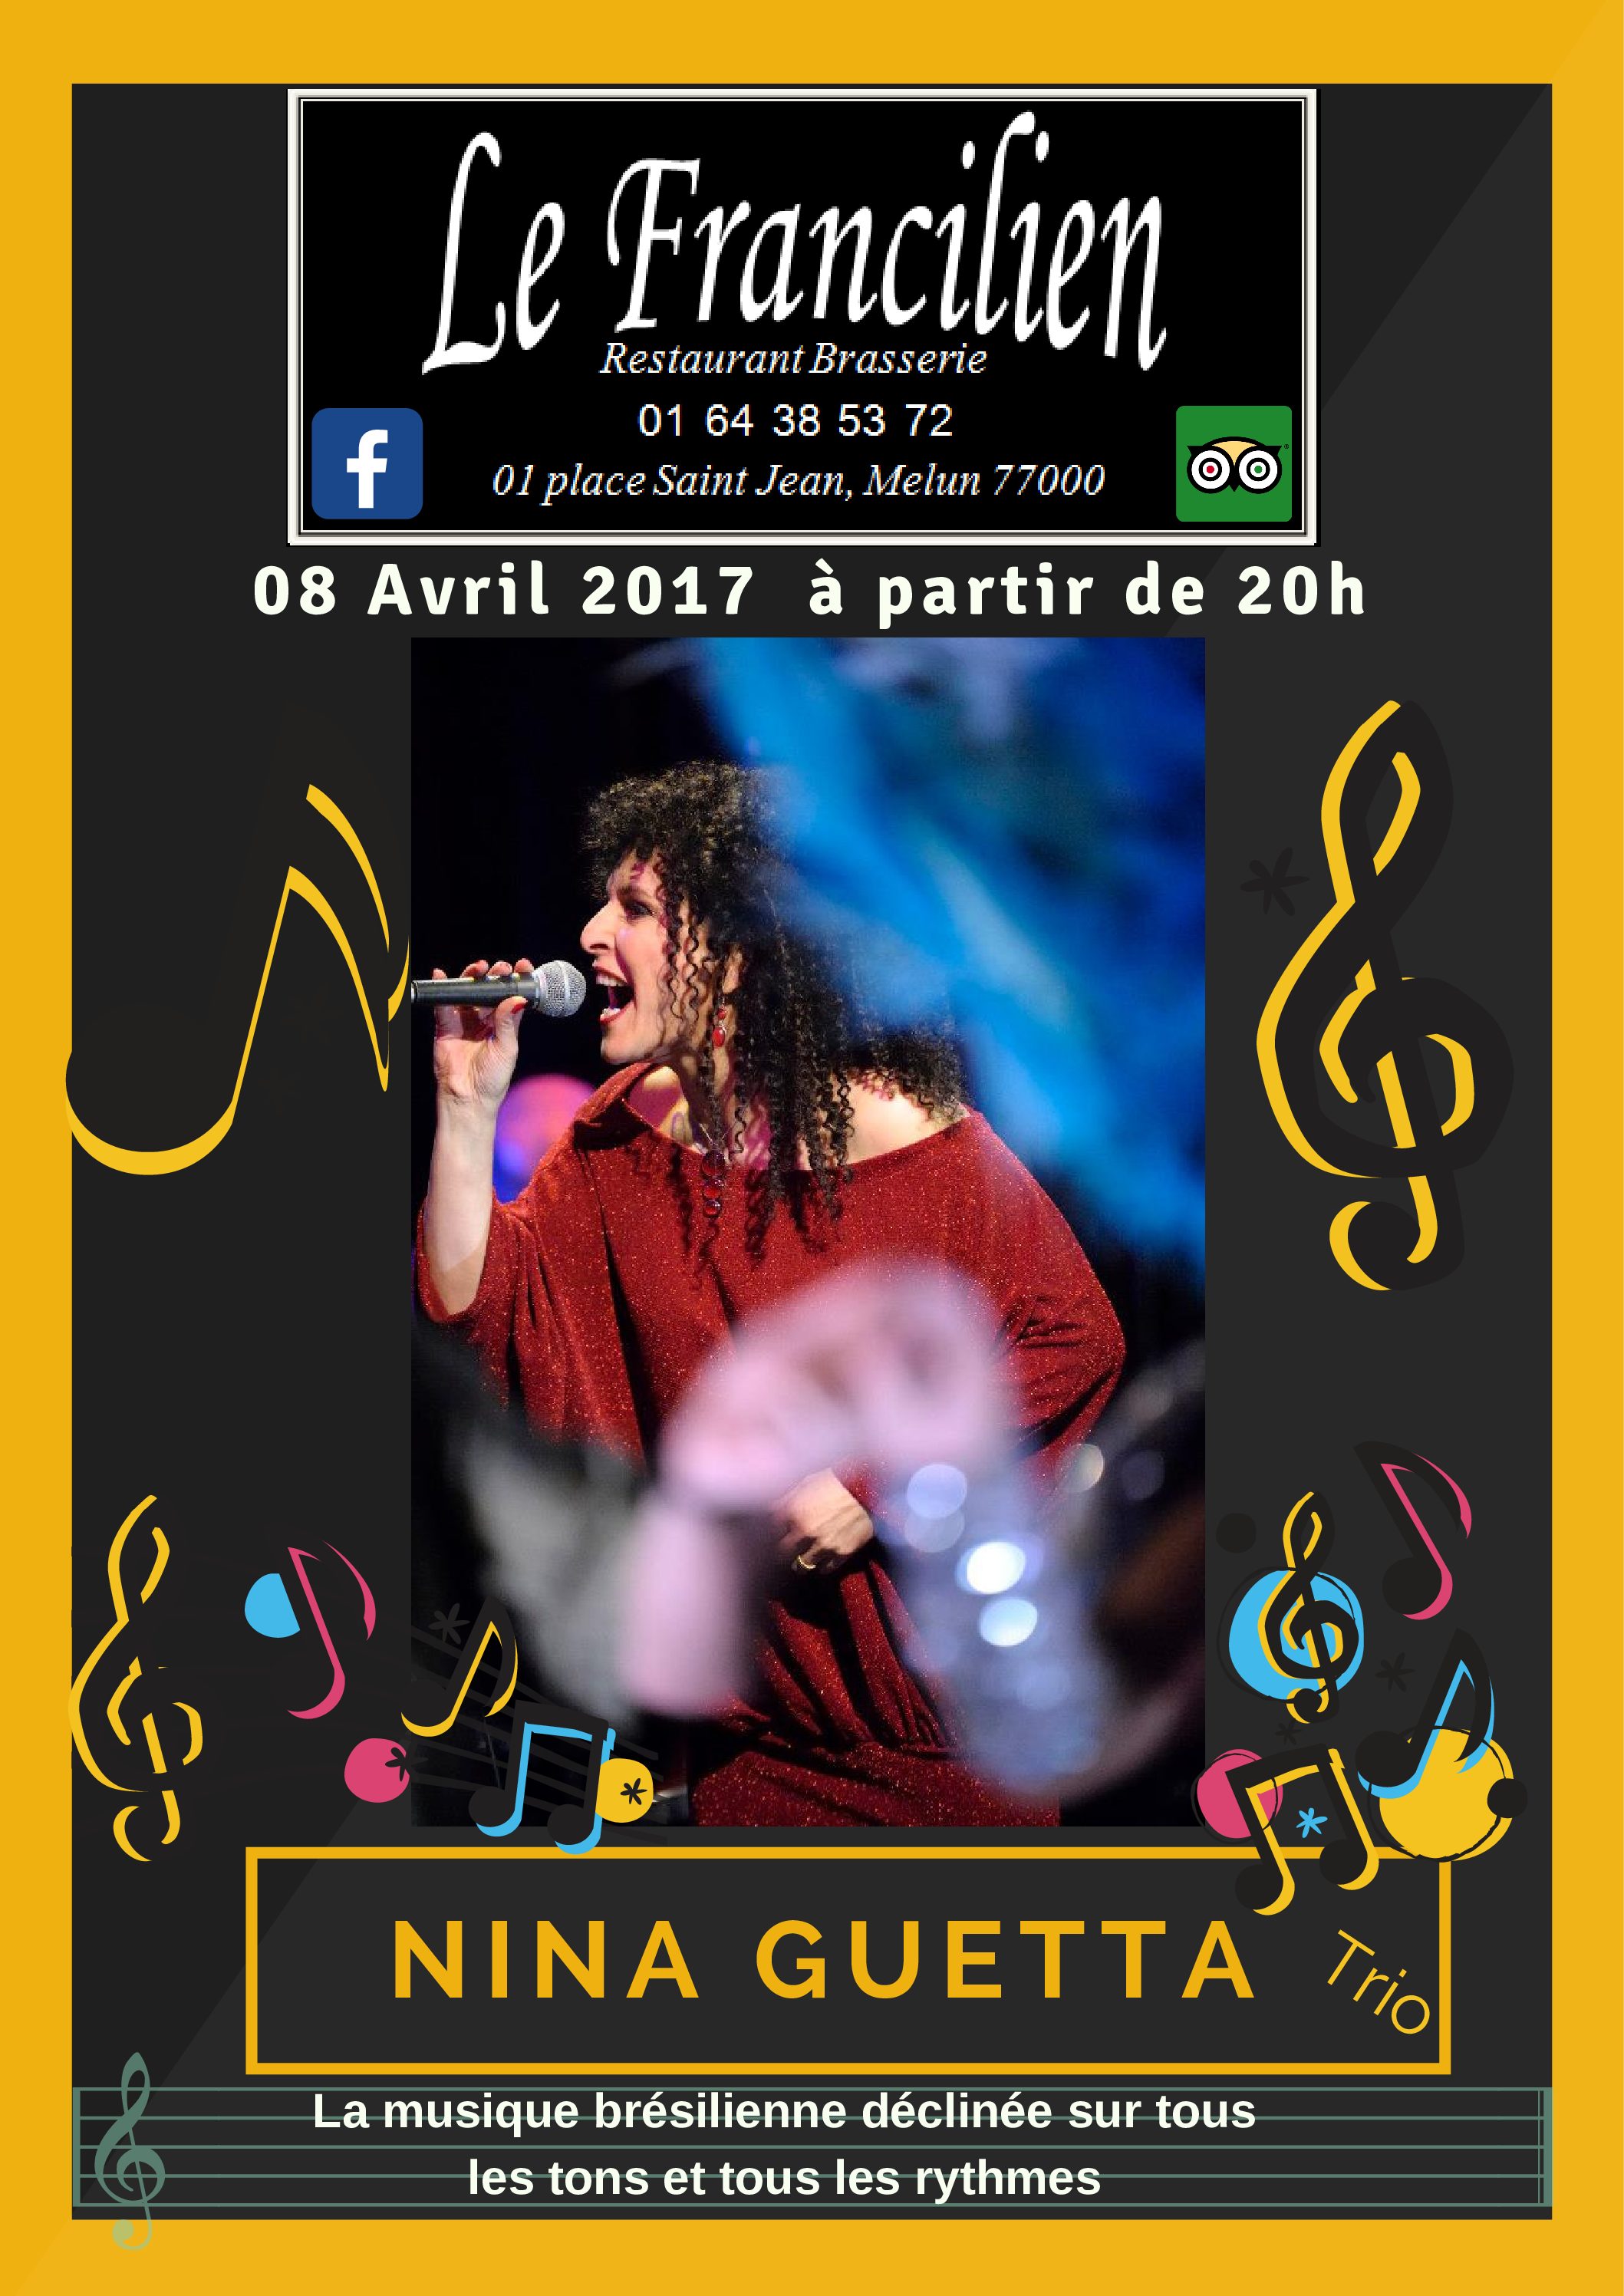 Concert at the Francilien in Melun saturday the 8.04.17. Brazilian Song